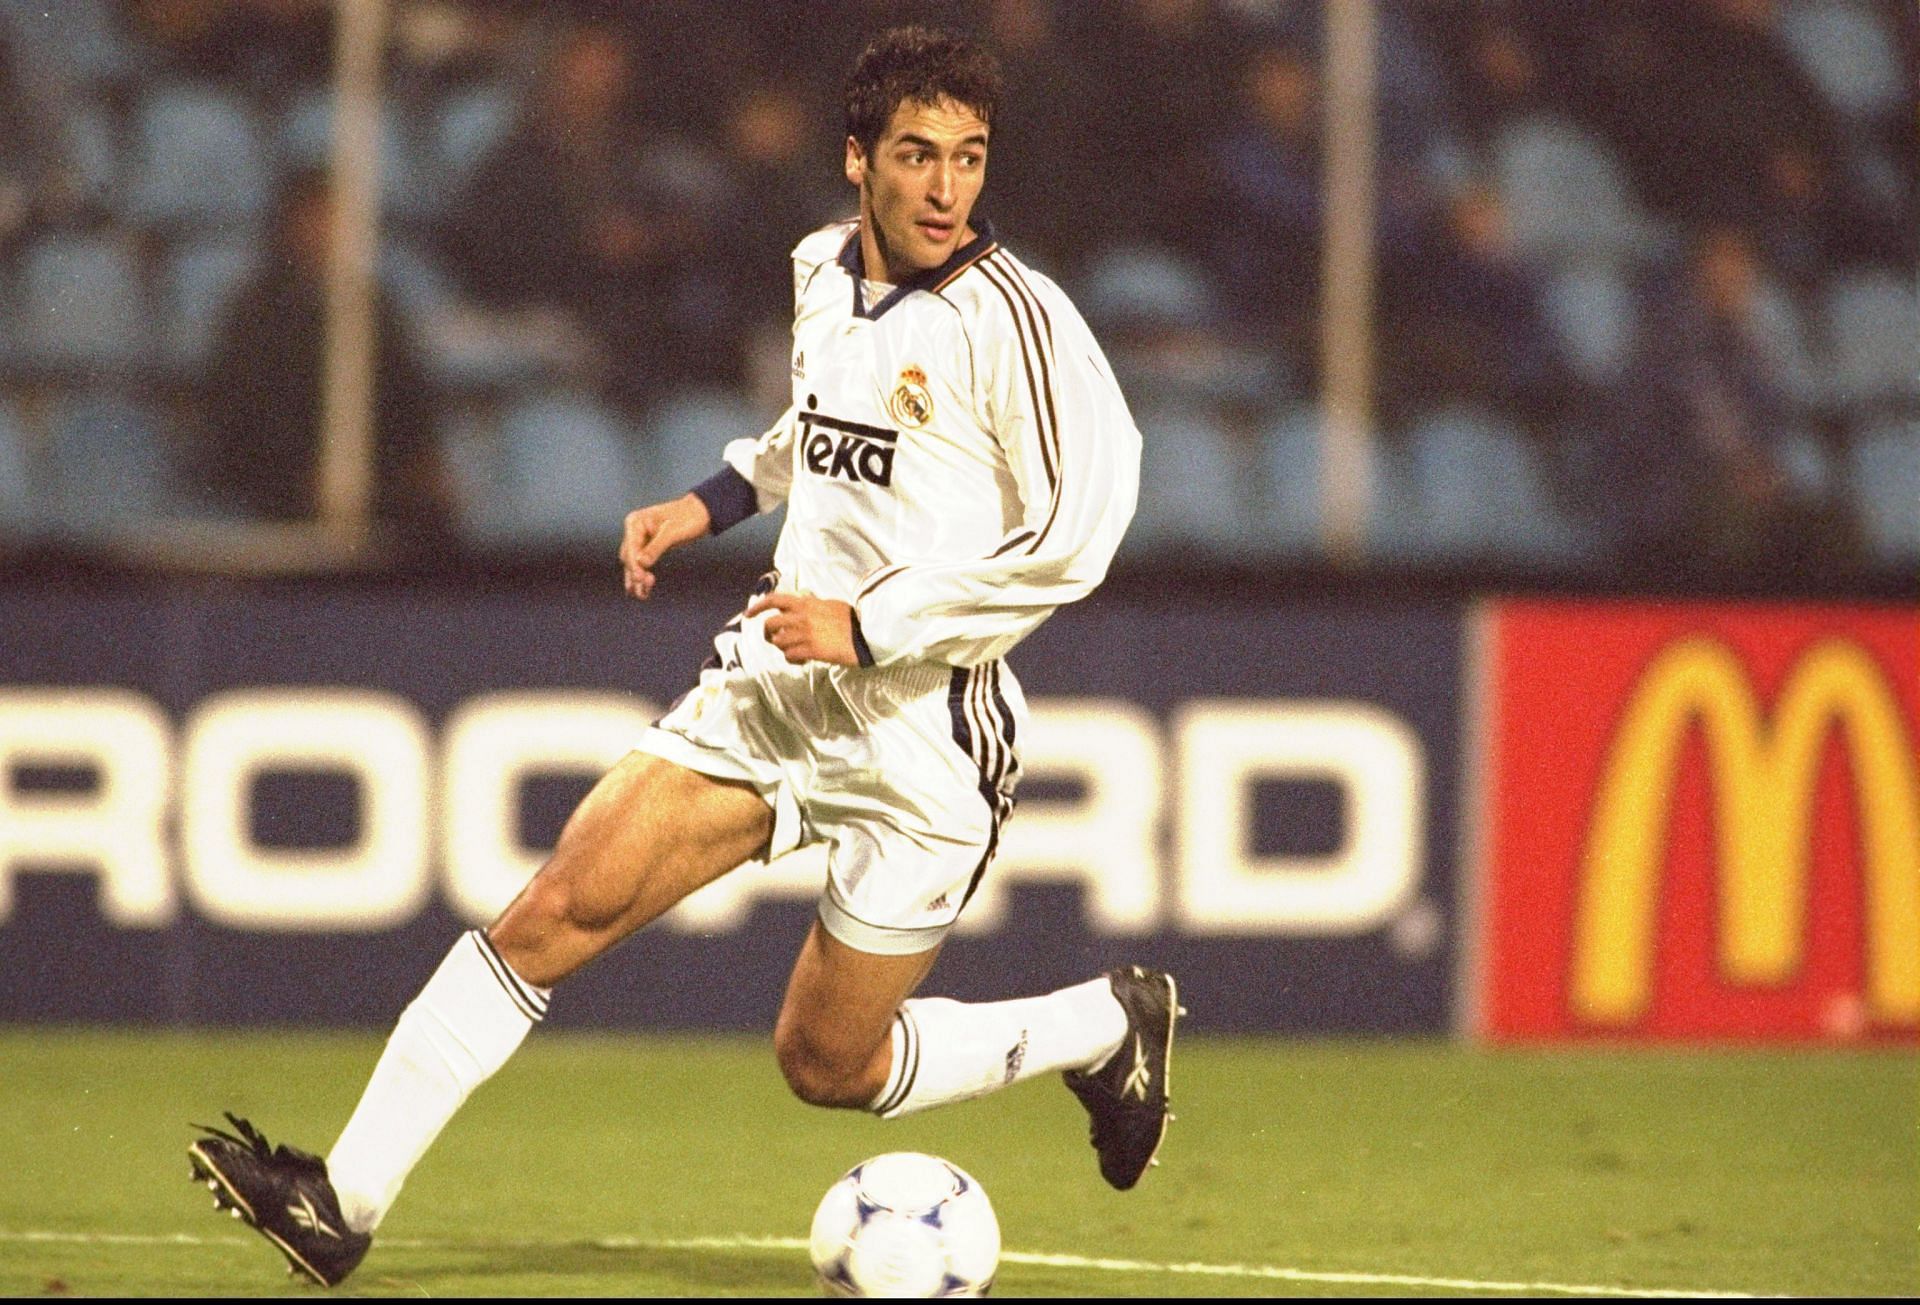 Raul started creating an impression during his youth days at Atletico Madrid